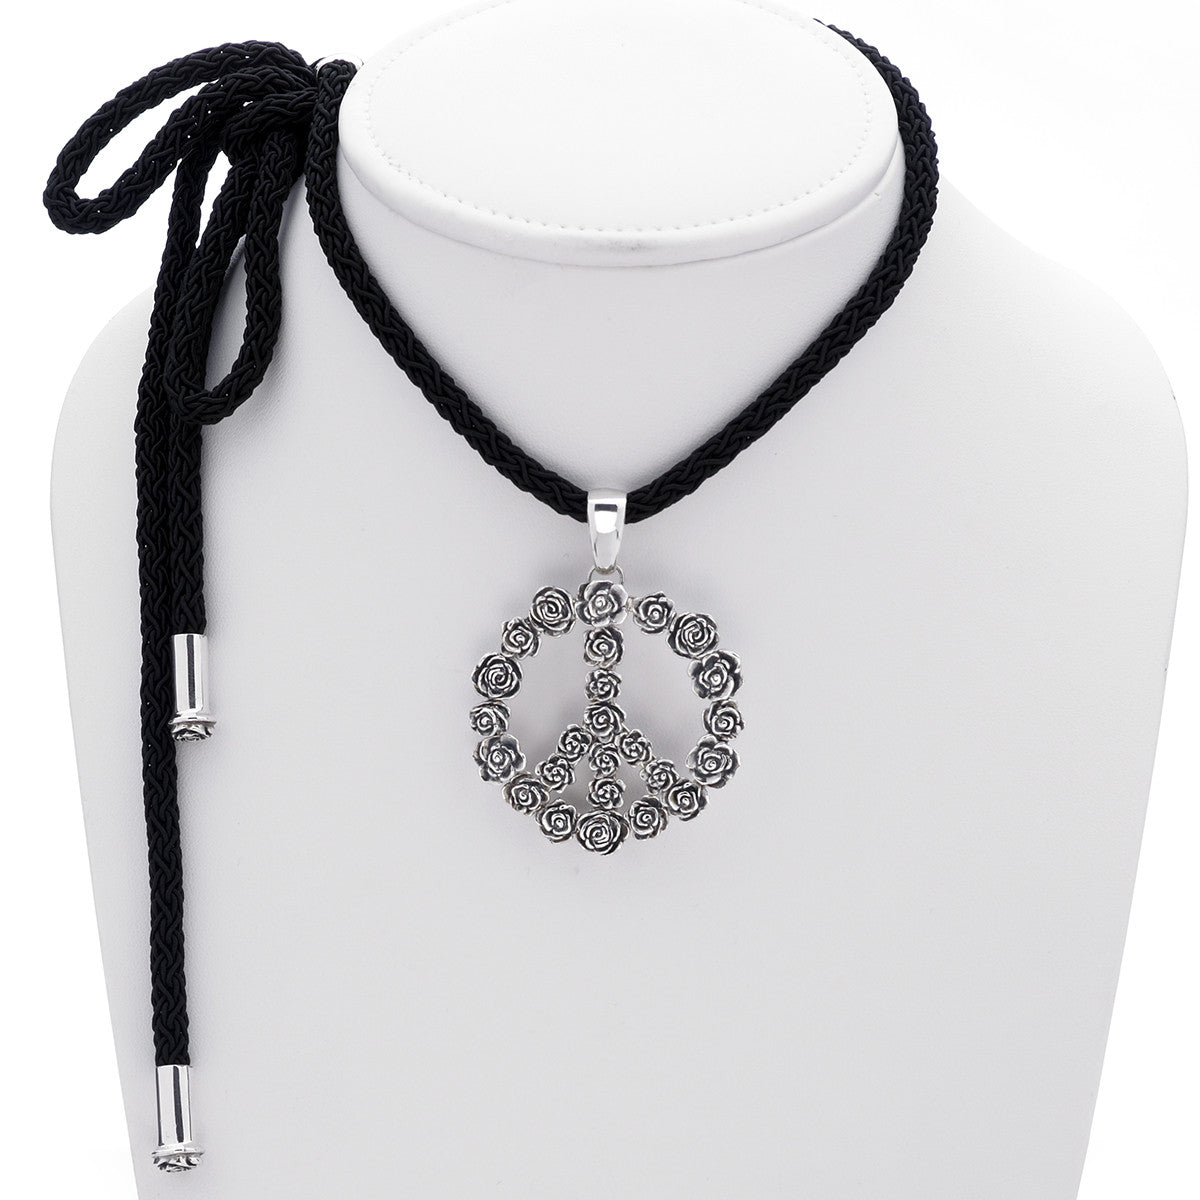 Imagine Peace Rose Sterling Silver Black Cord Necklace